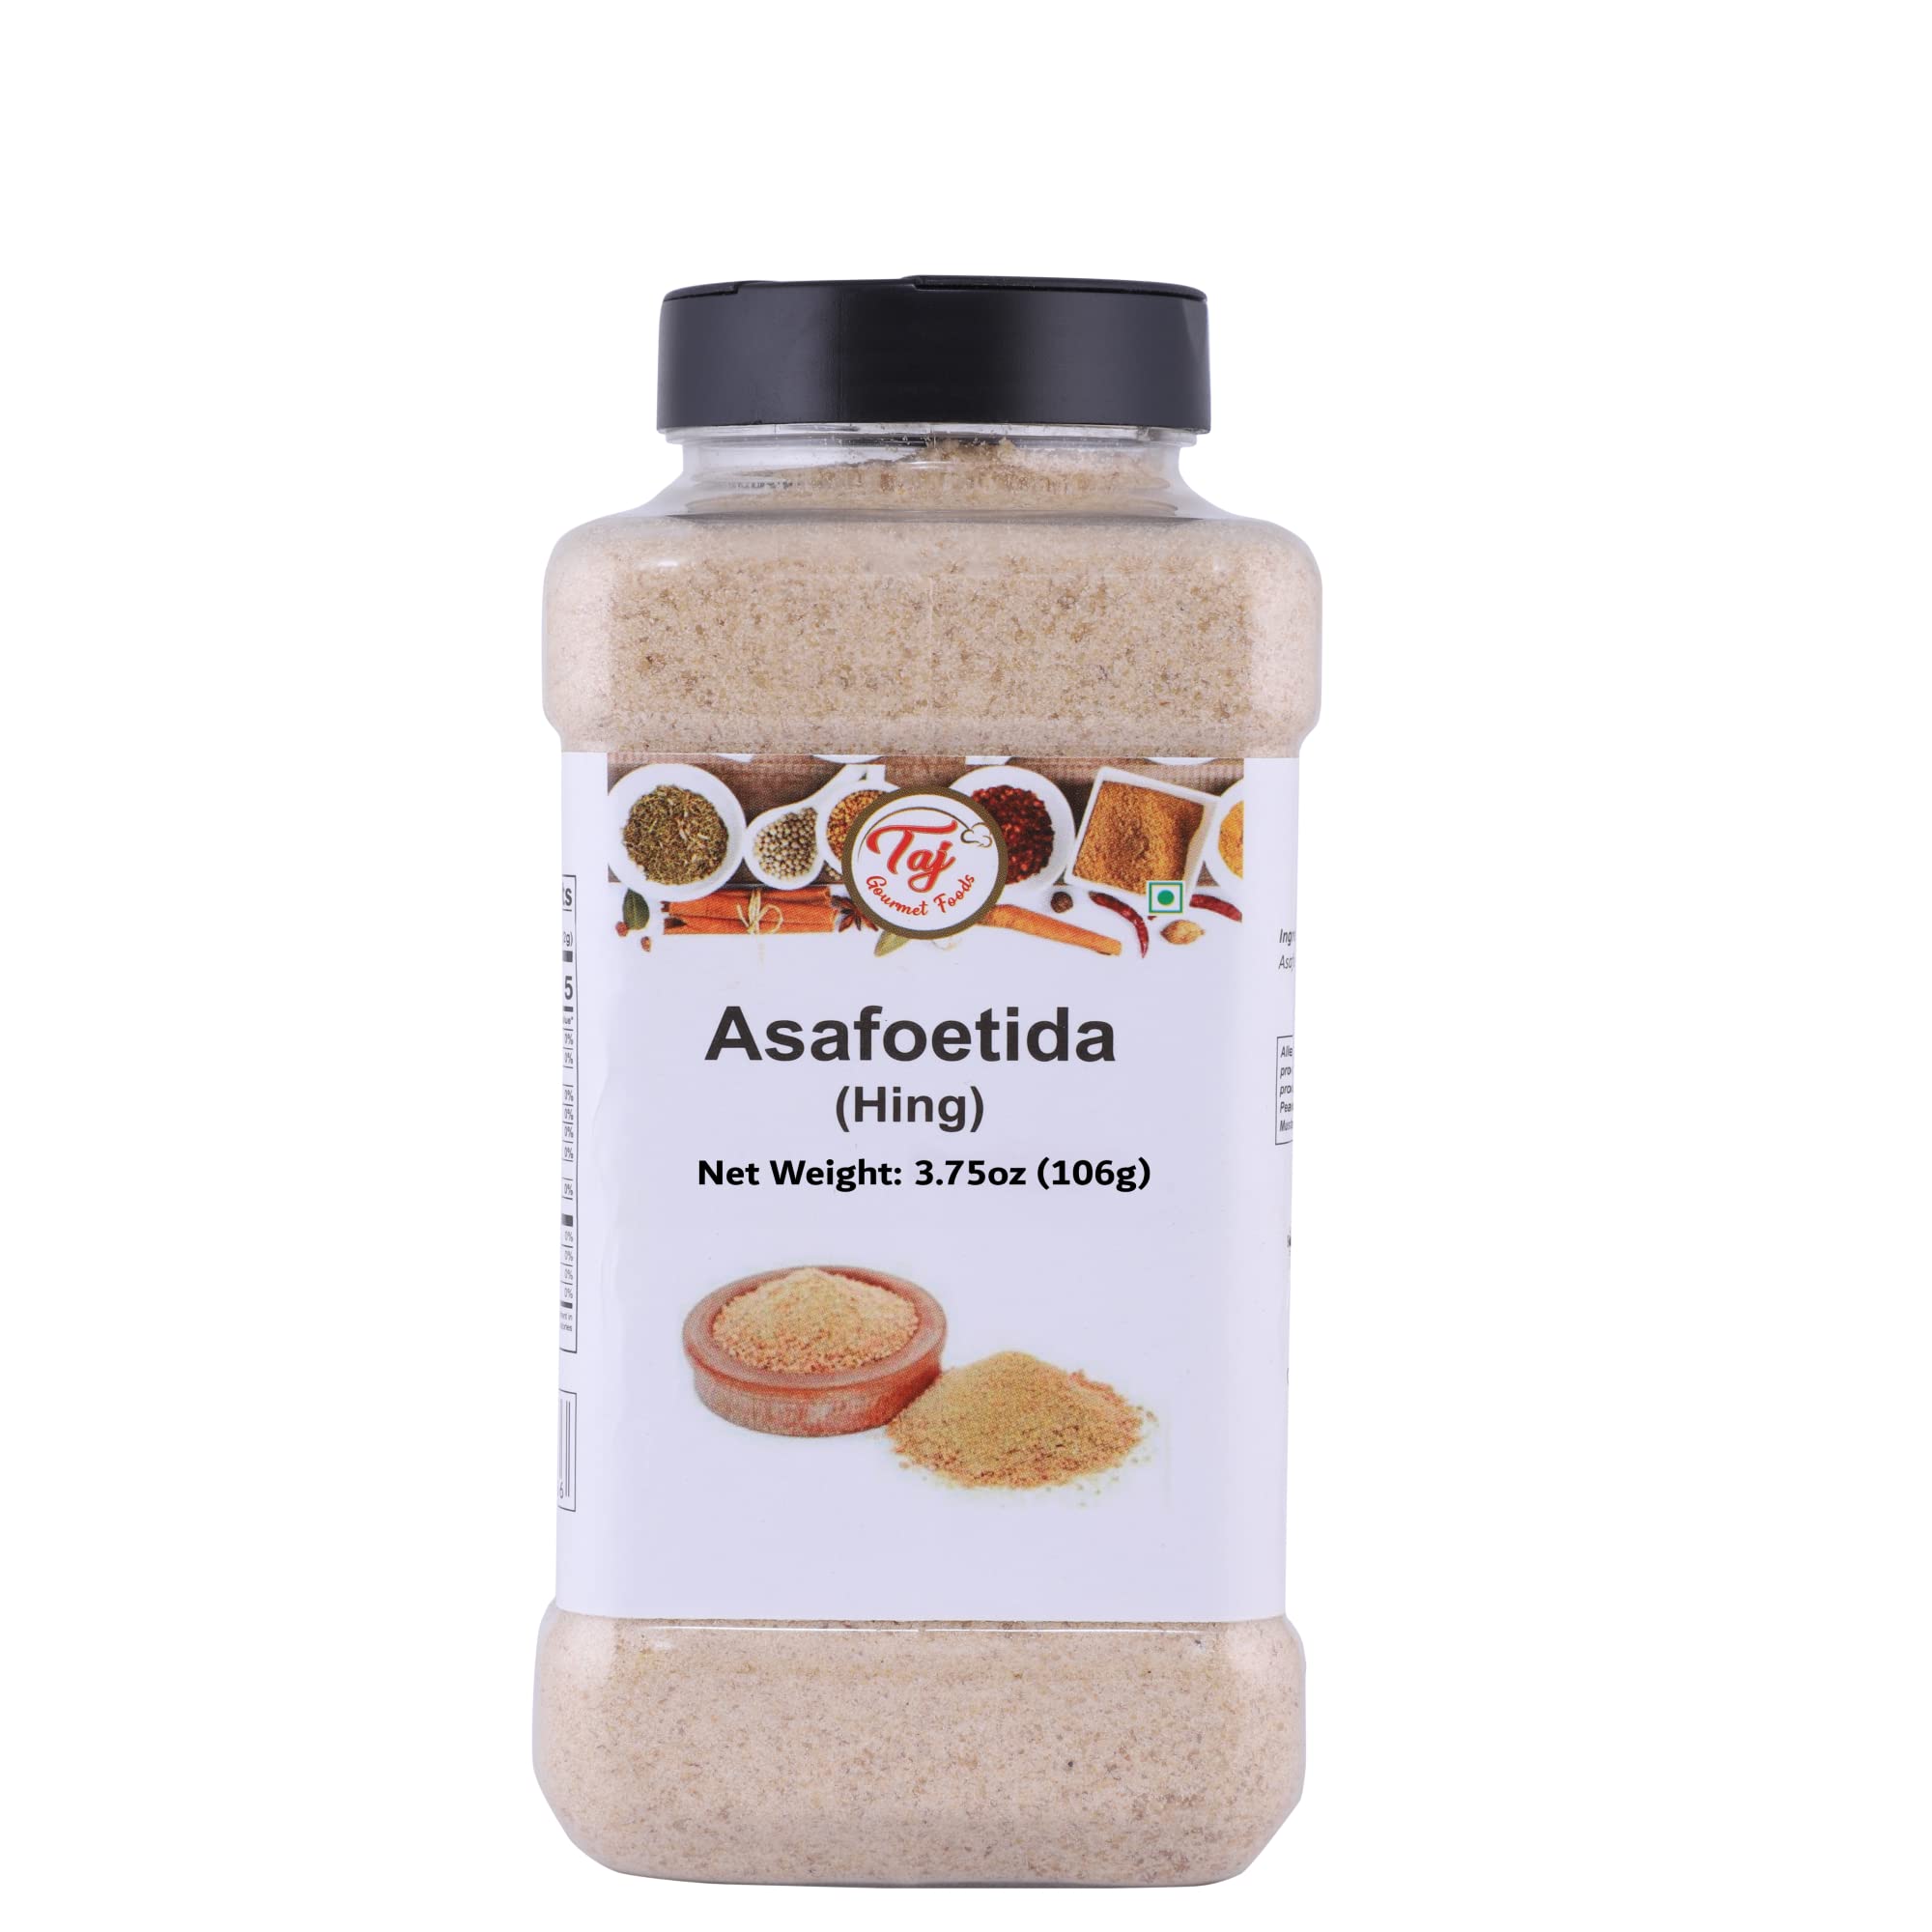 Amazon.com : Savory Spice Asafetida - Asafoetida Powder (Hing), Indian  Spice Blend | Great Substitute for Garlic Powder & Onion Powder for  Garlic-Free or Onion-Free Diets (1/2 Cup Bag - Net: 2.65